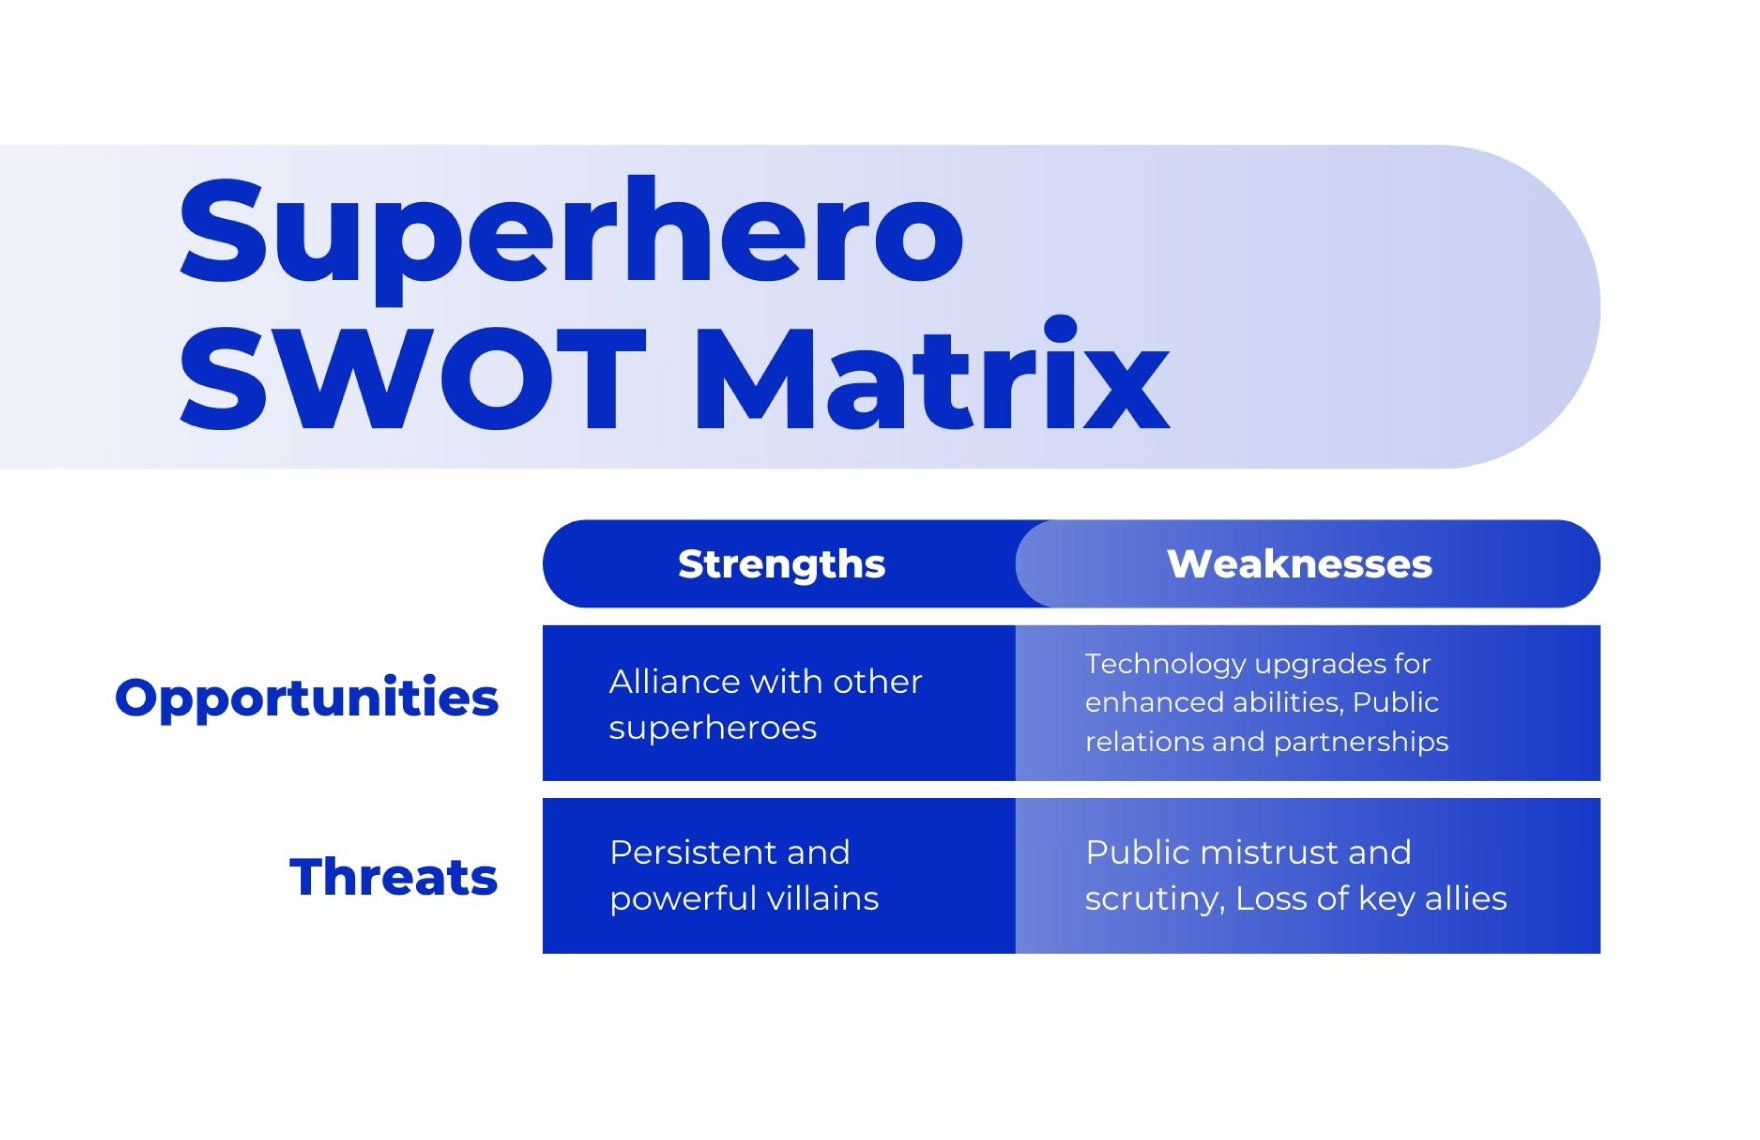 SWOT Analysis Infographic Template